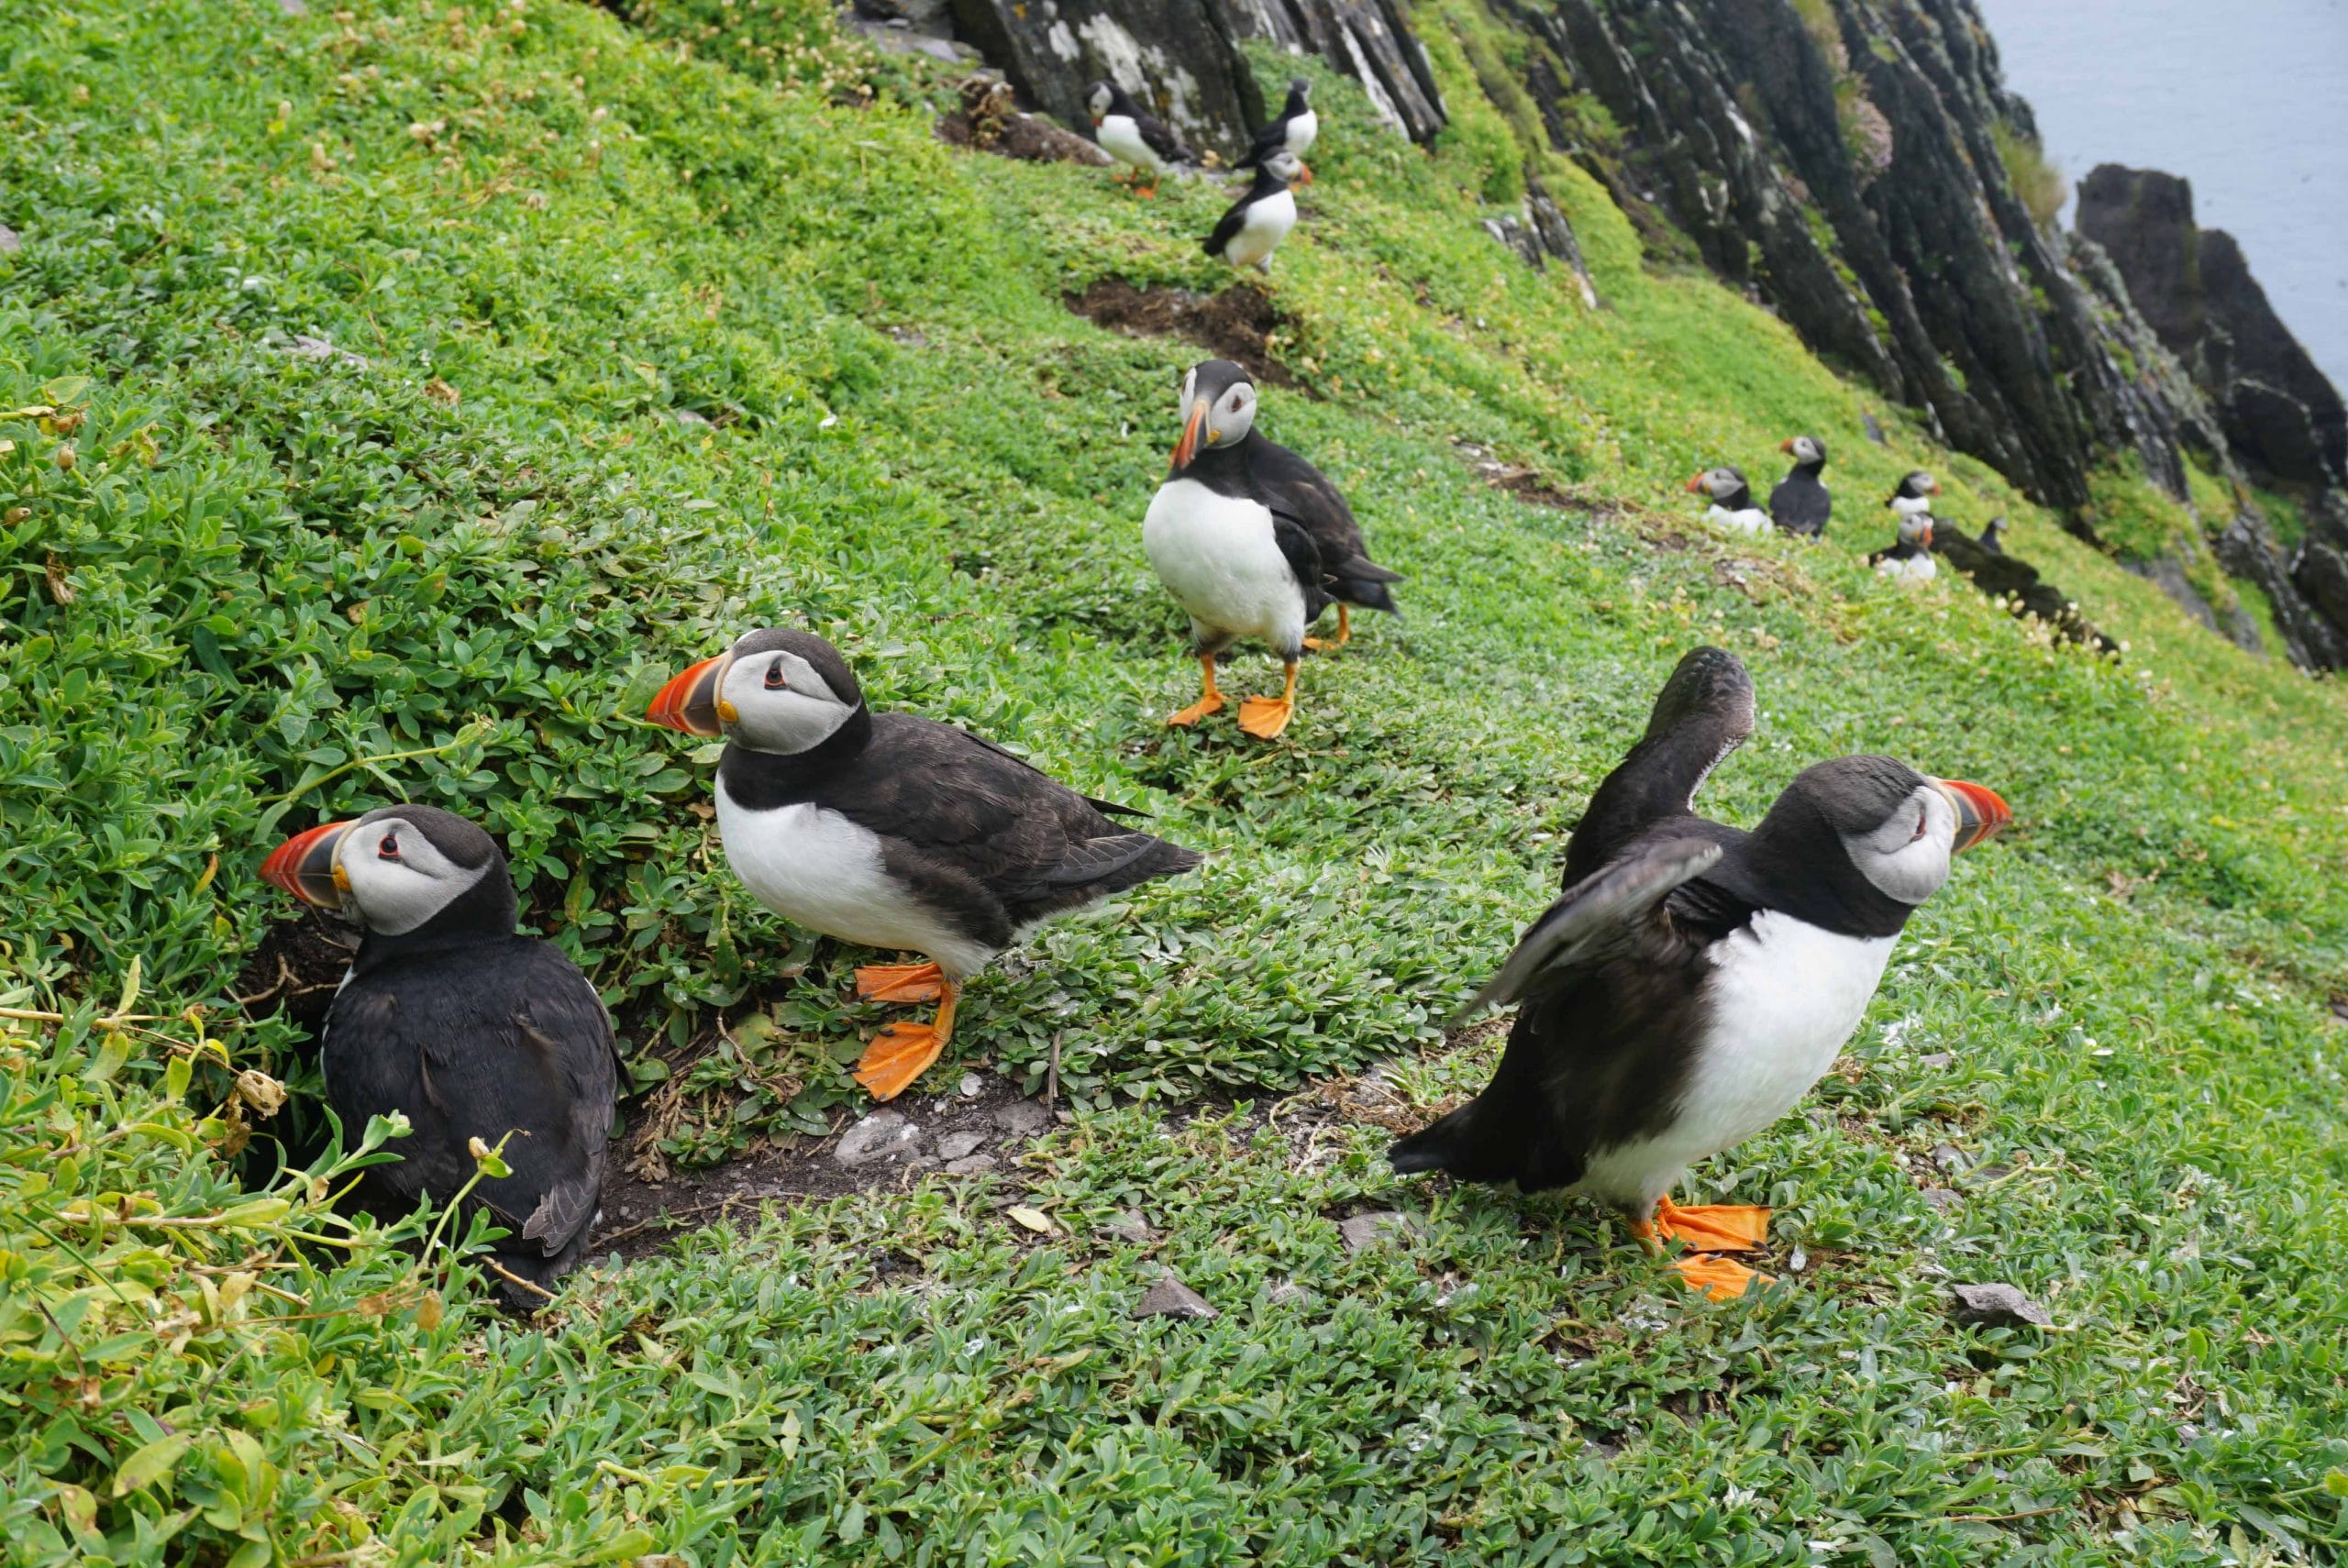 Majestic puffins of Skellig Michael